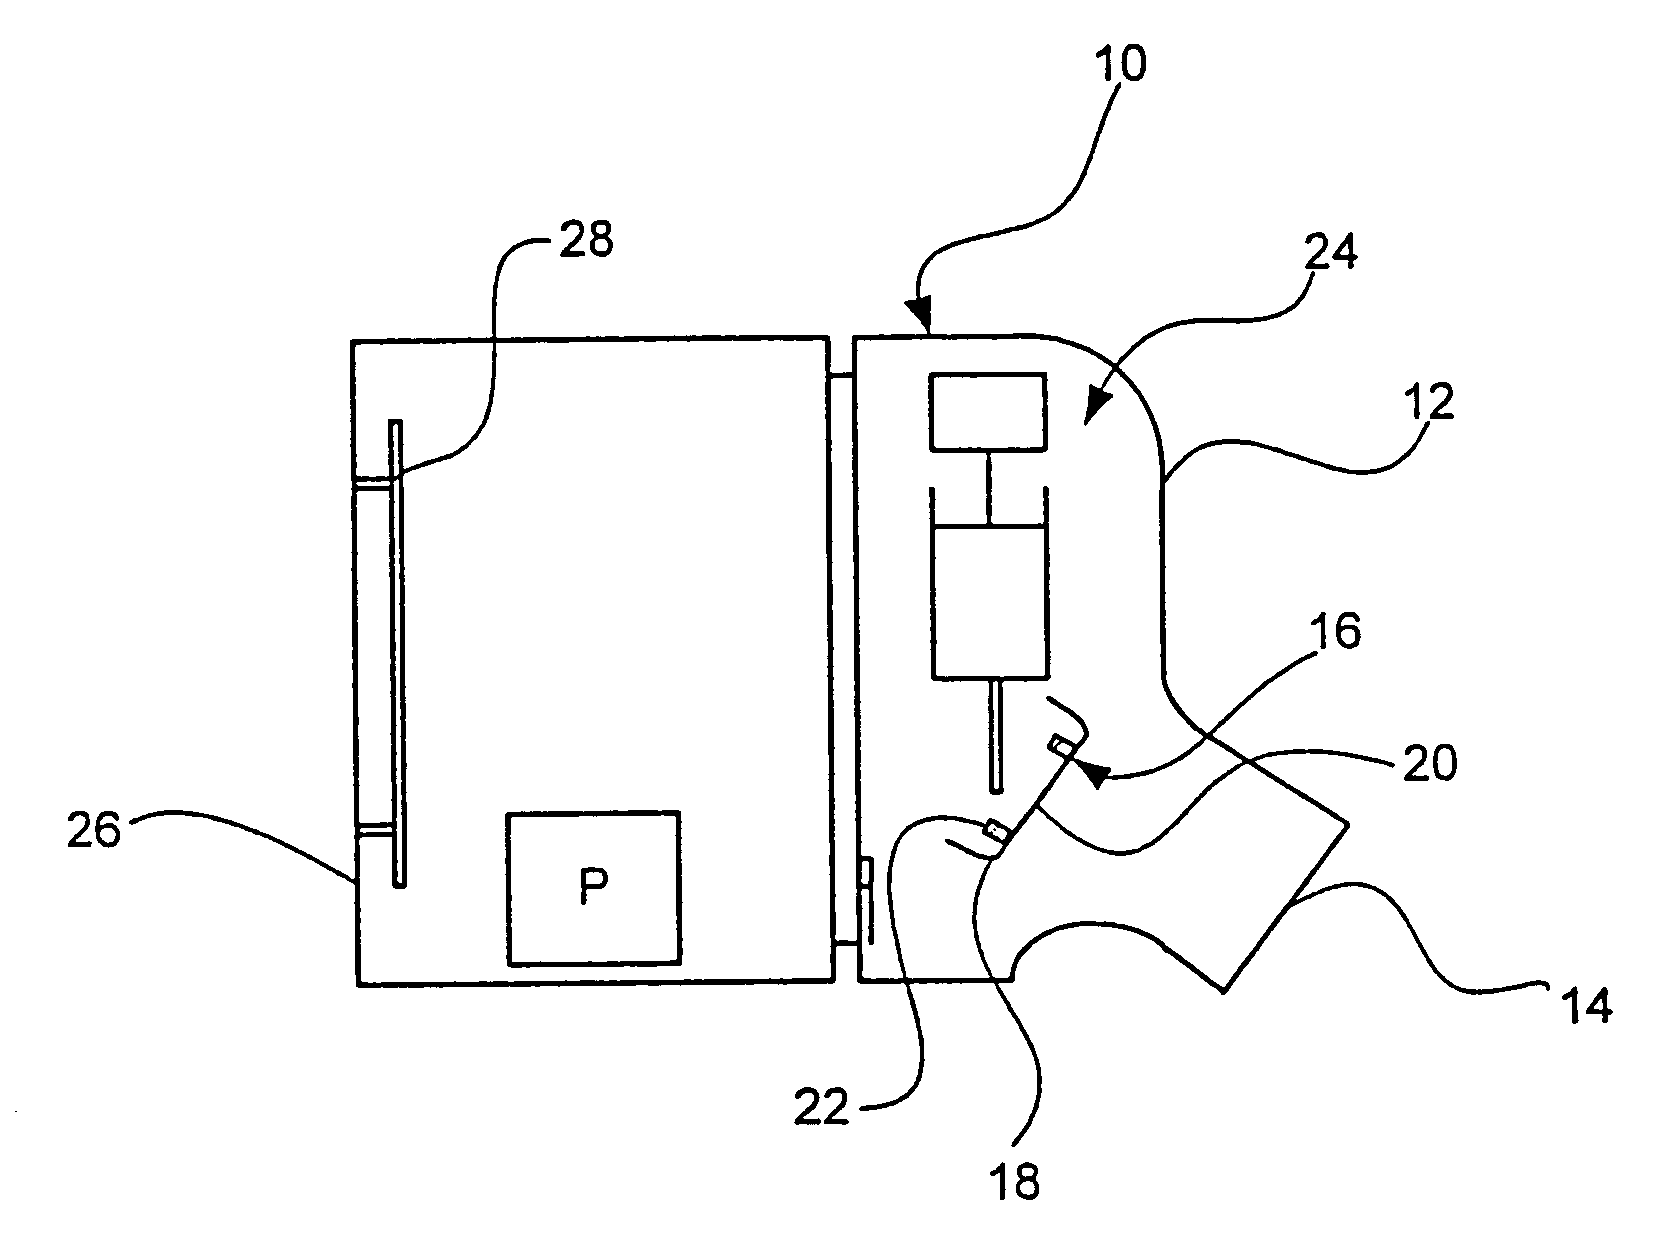 Systems and methods for controlling fluid feed to an aerosol generator